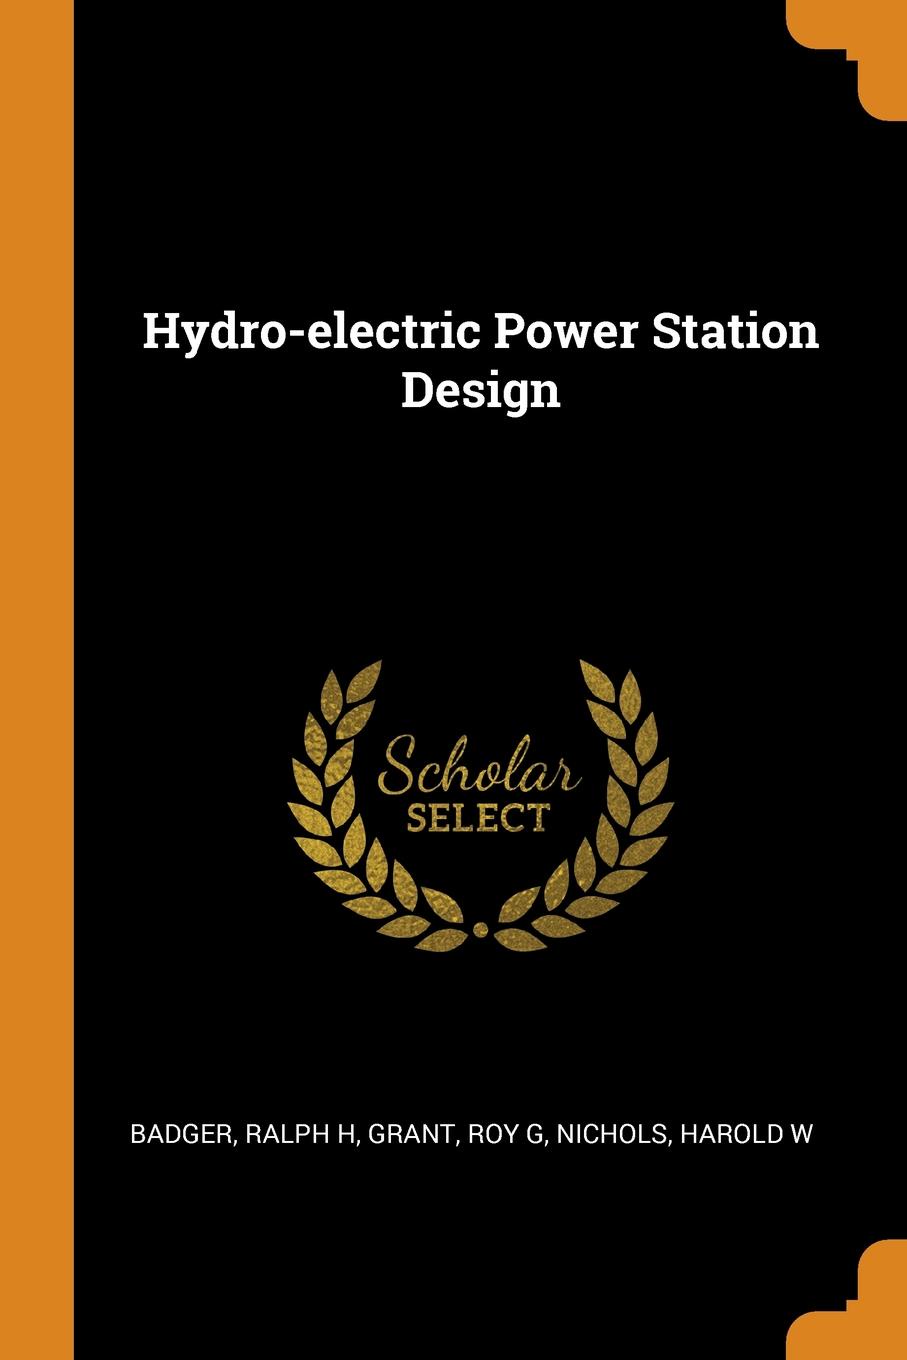 Hydro-electric Power Station Design